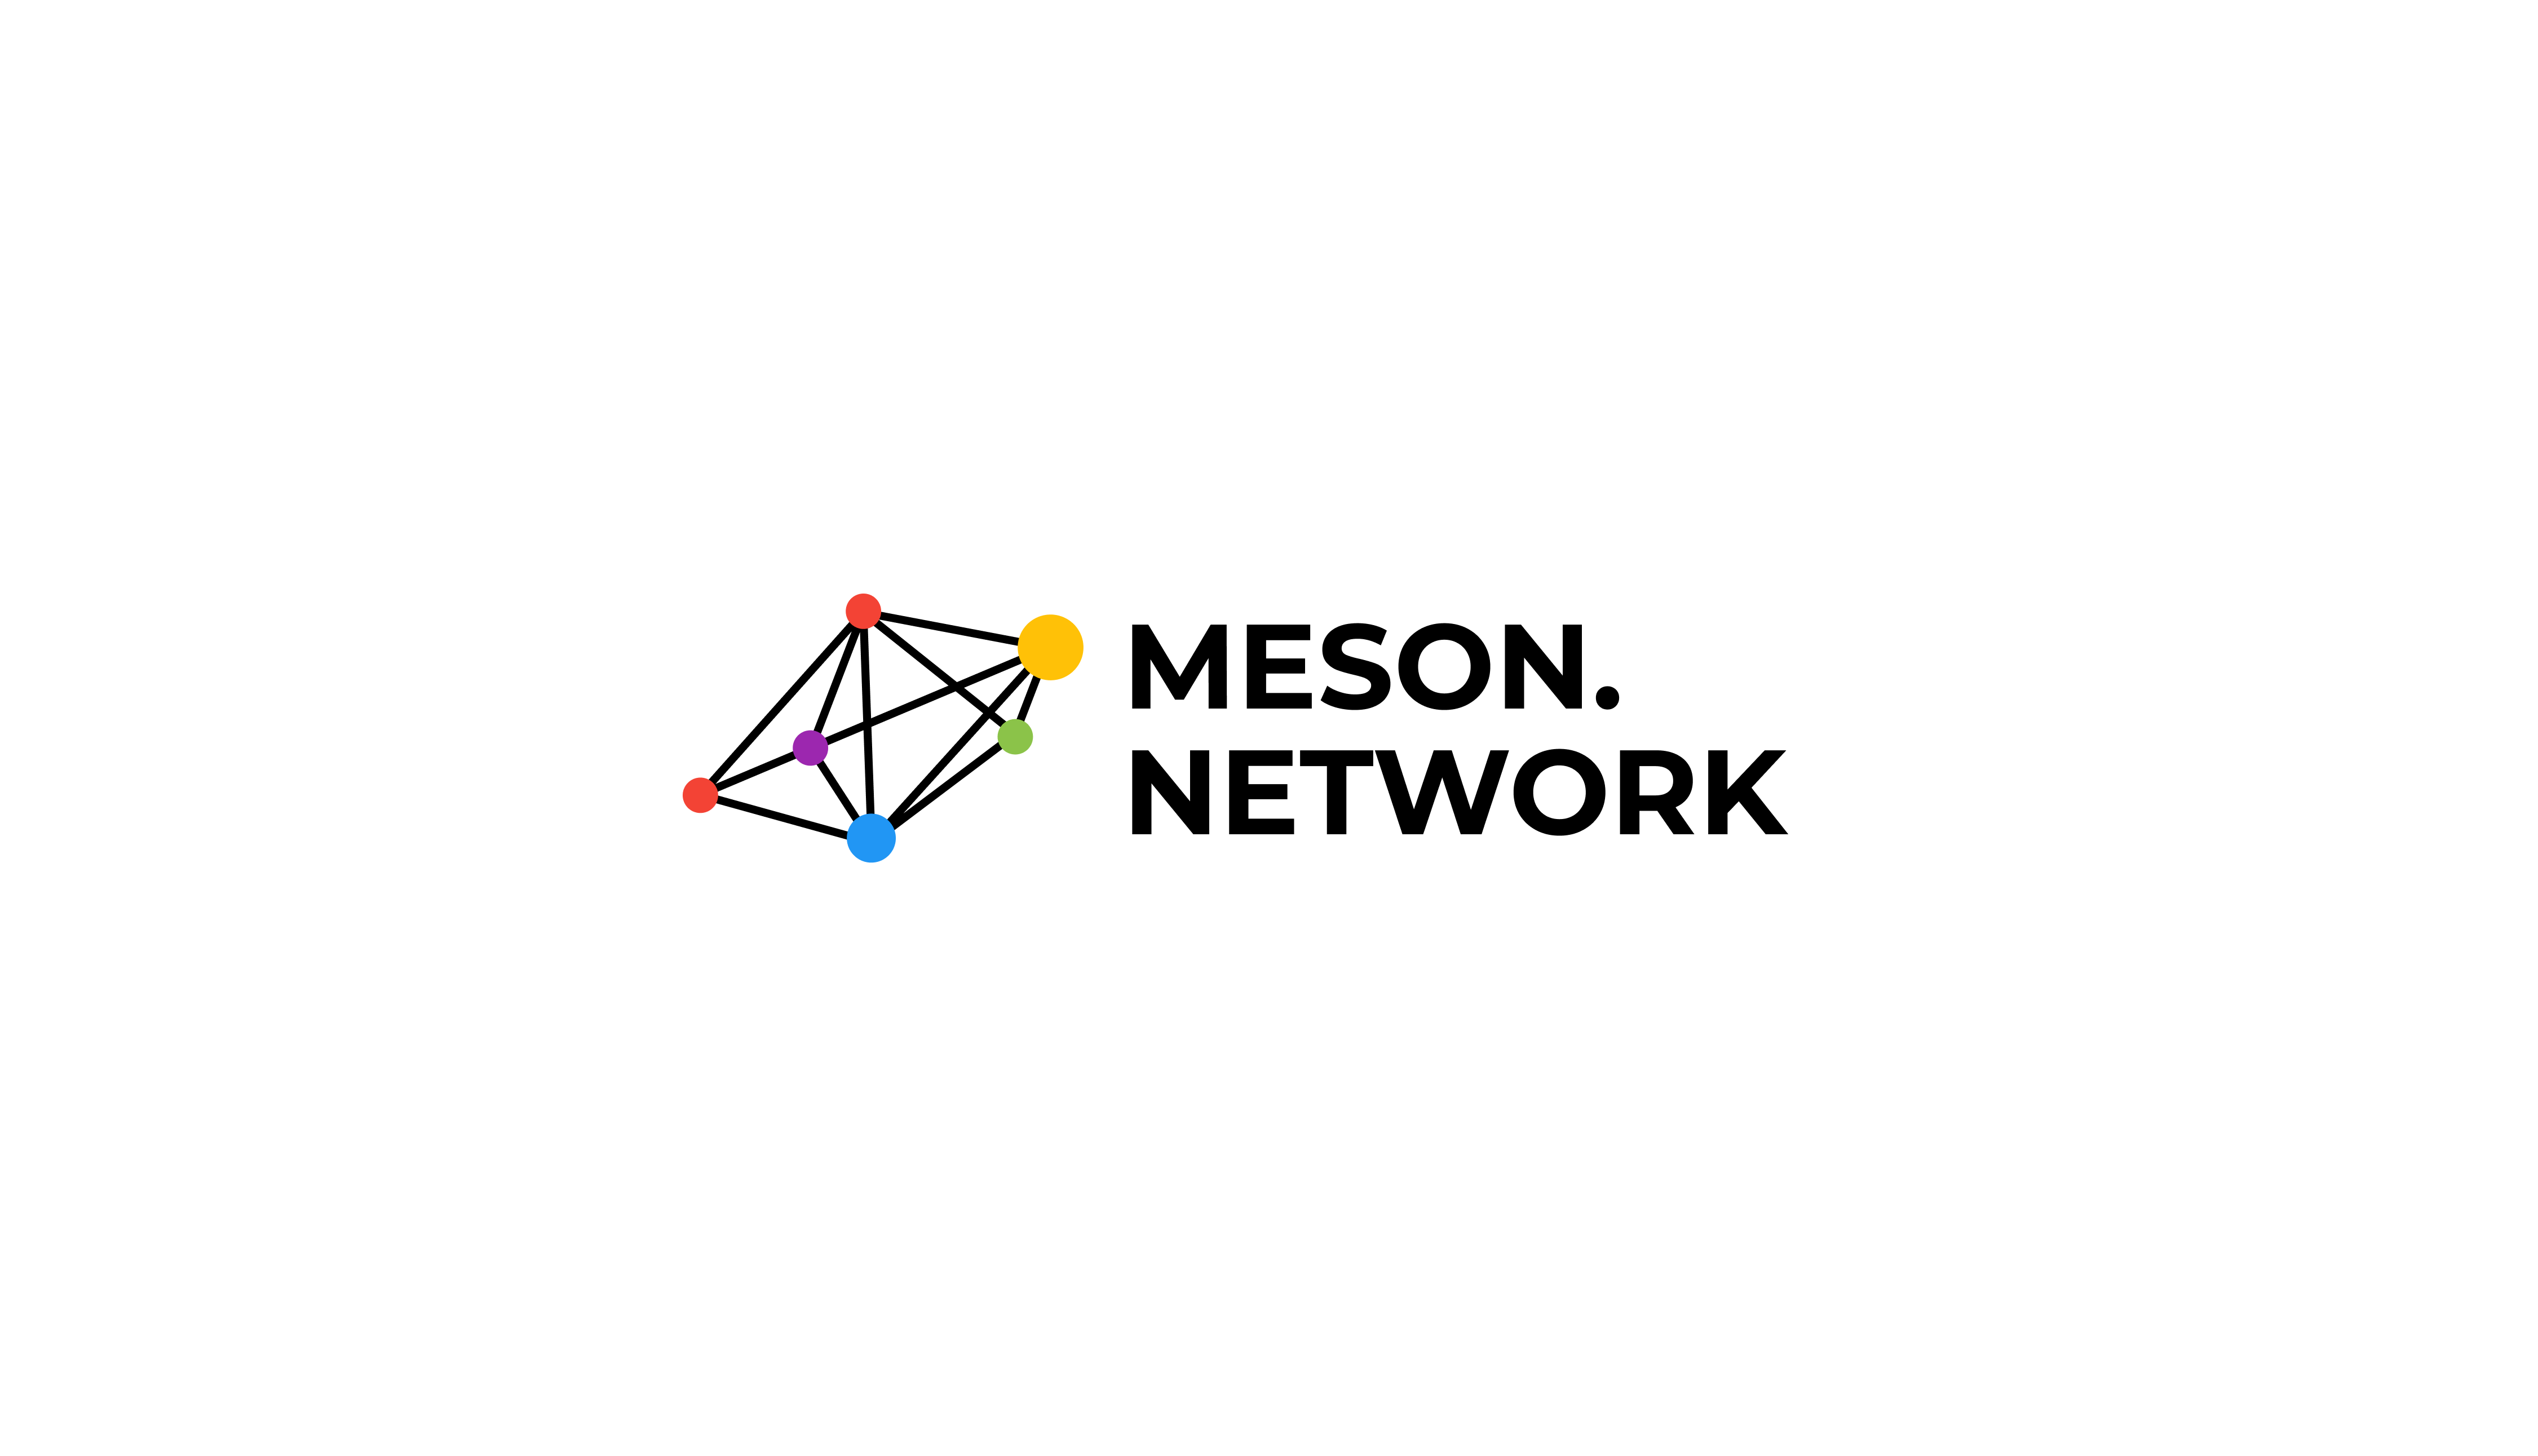 Key Features of Meson Network